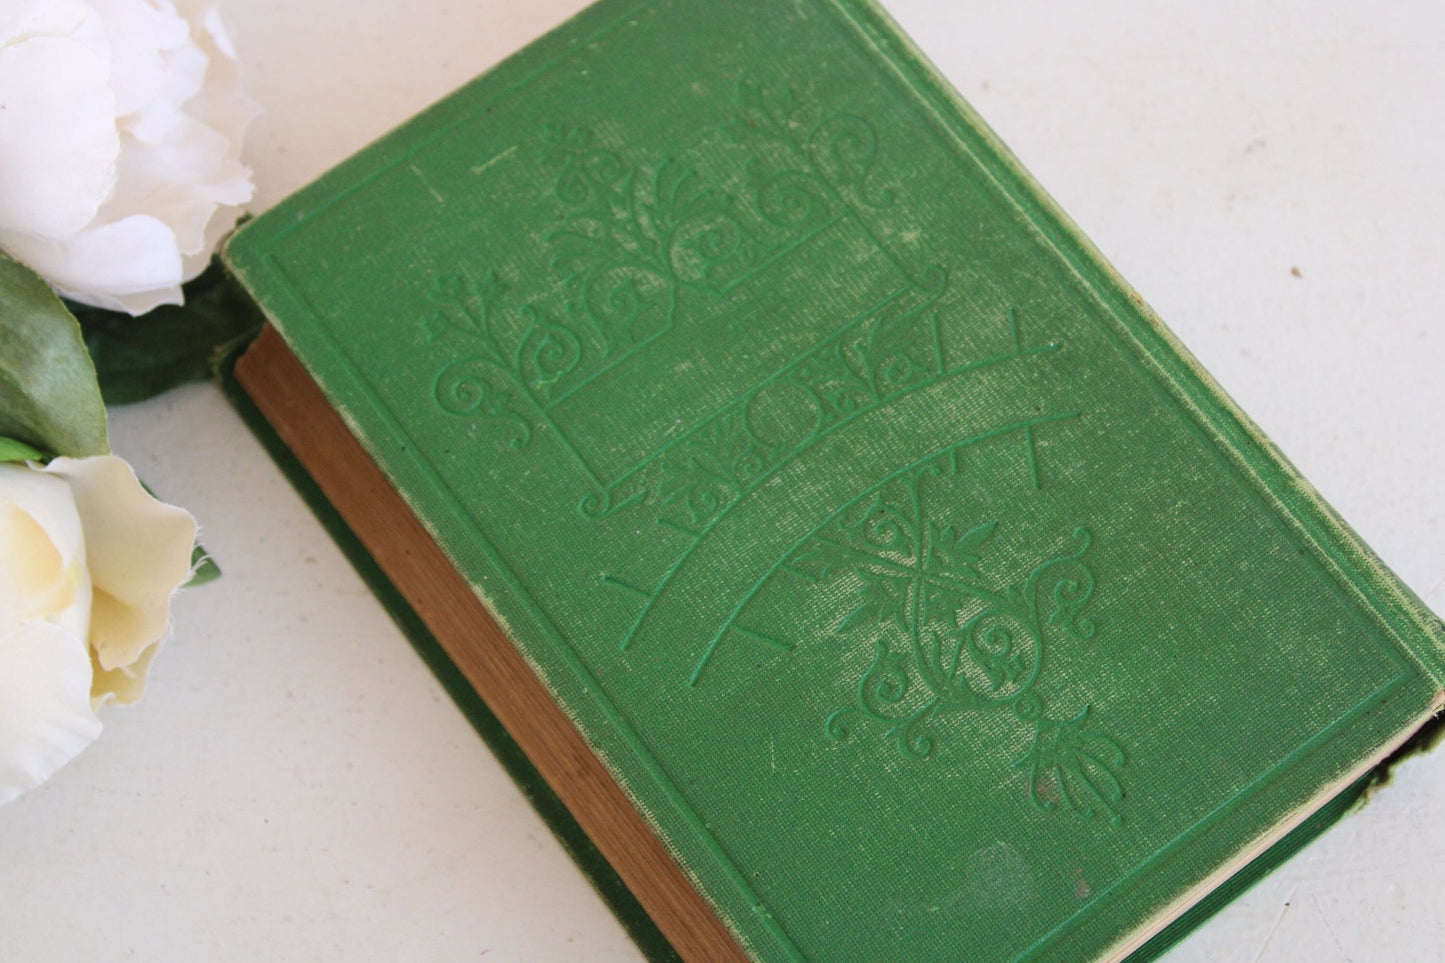 Vintage Antique 1870s Book, "Our Digestion, or My Jolly Friend's Secret" by Dio Lewis MD